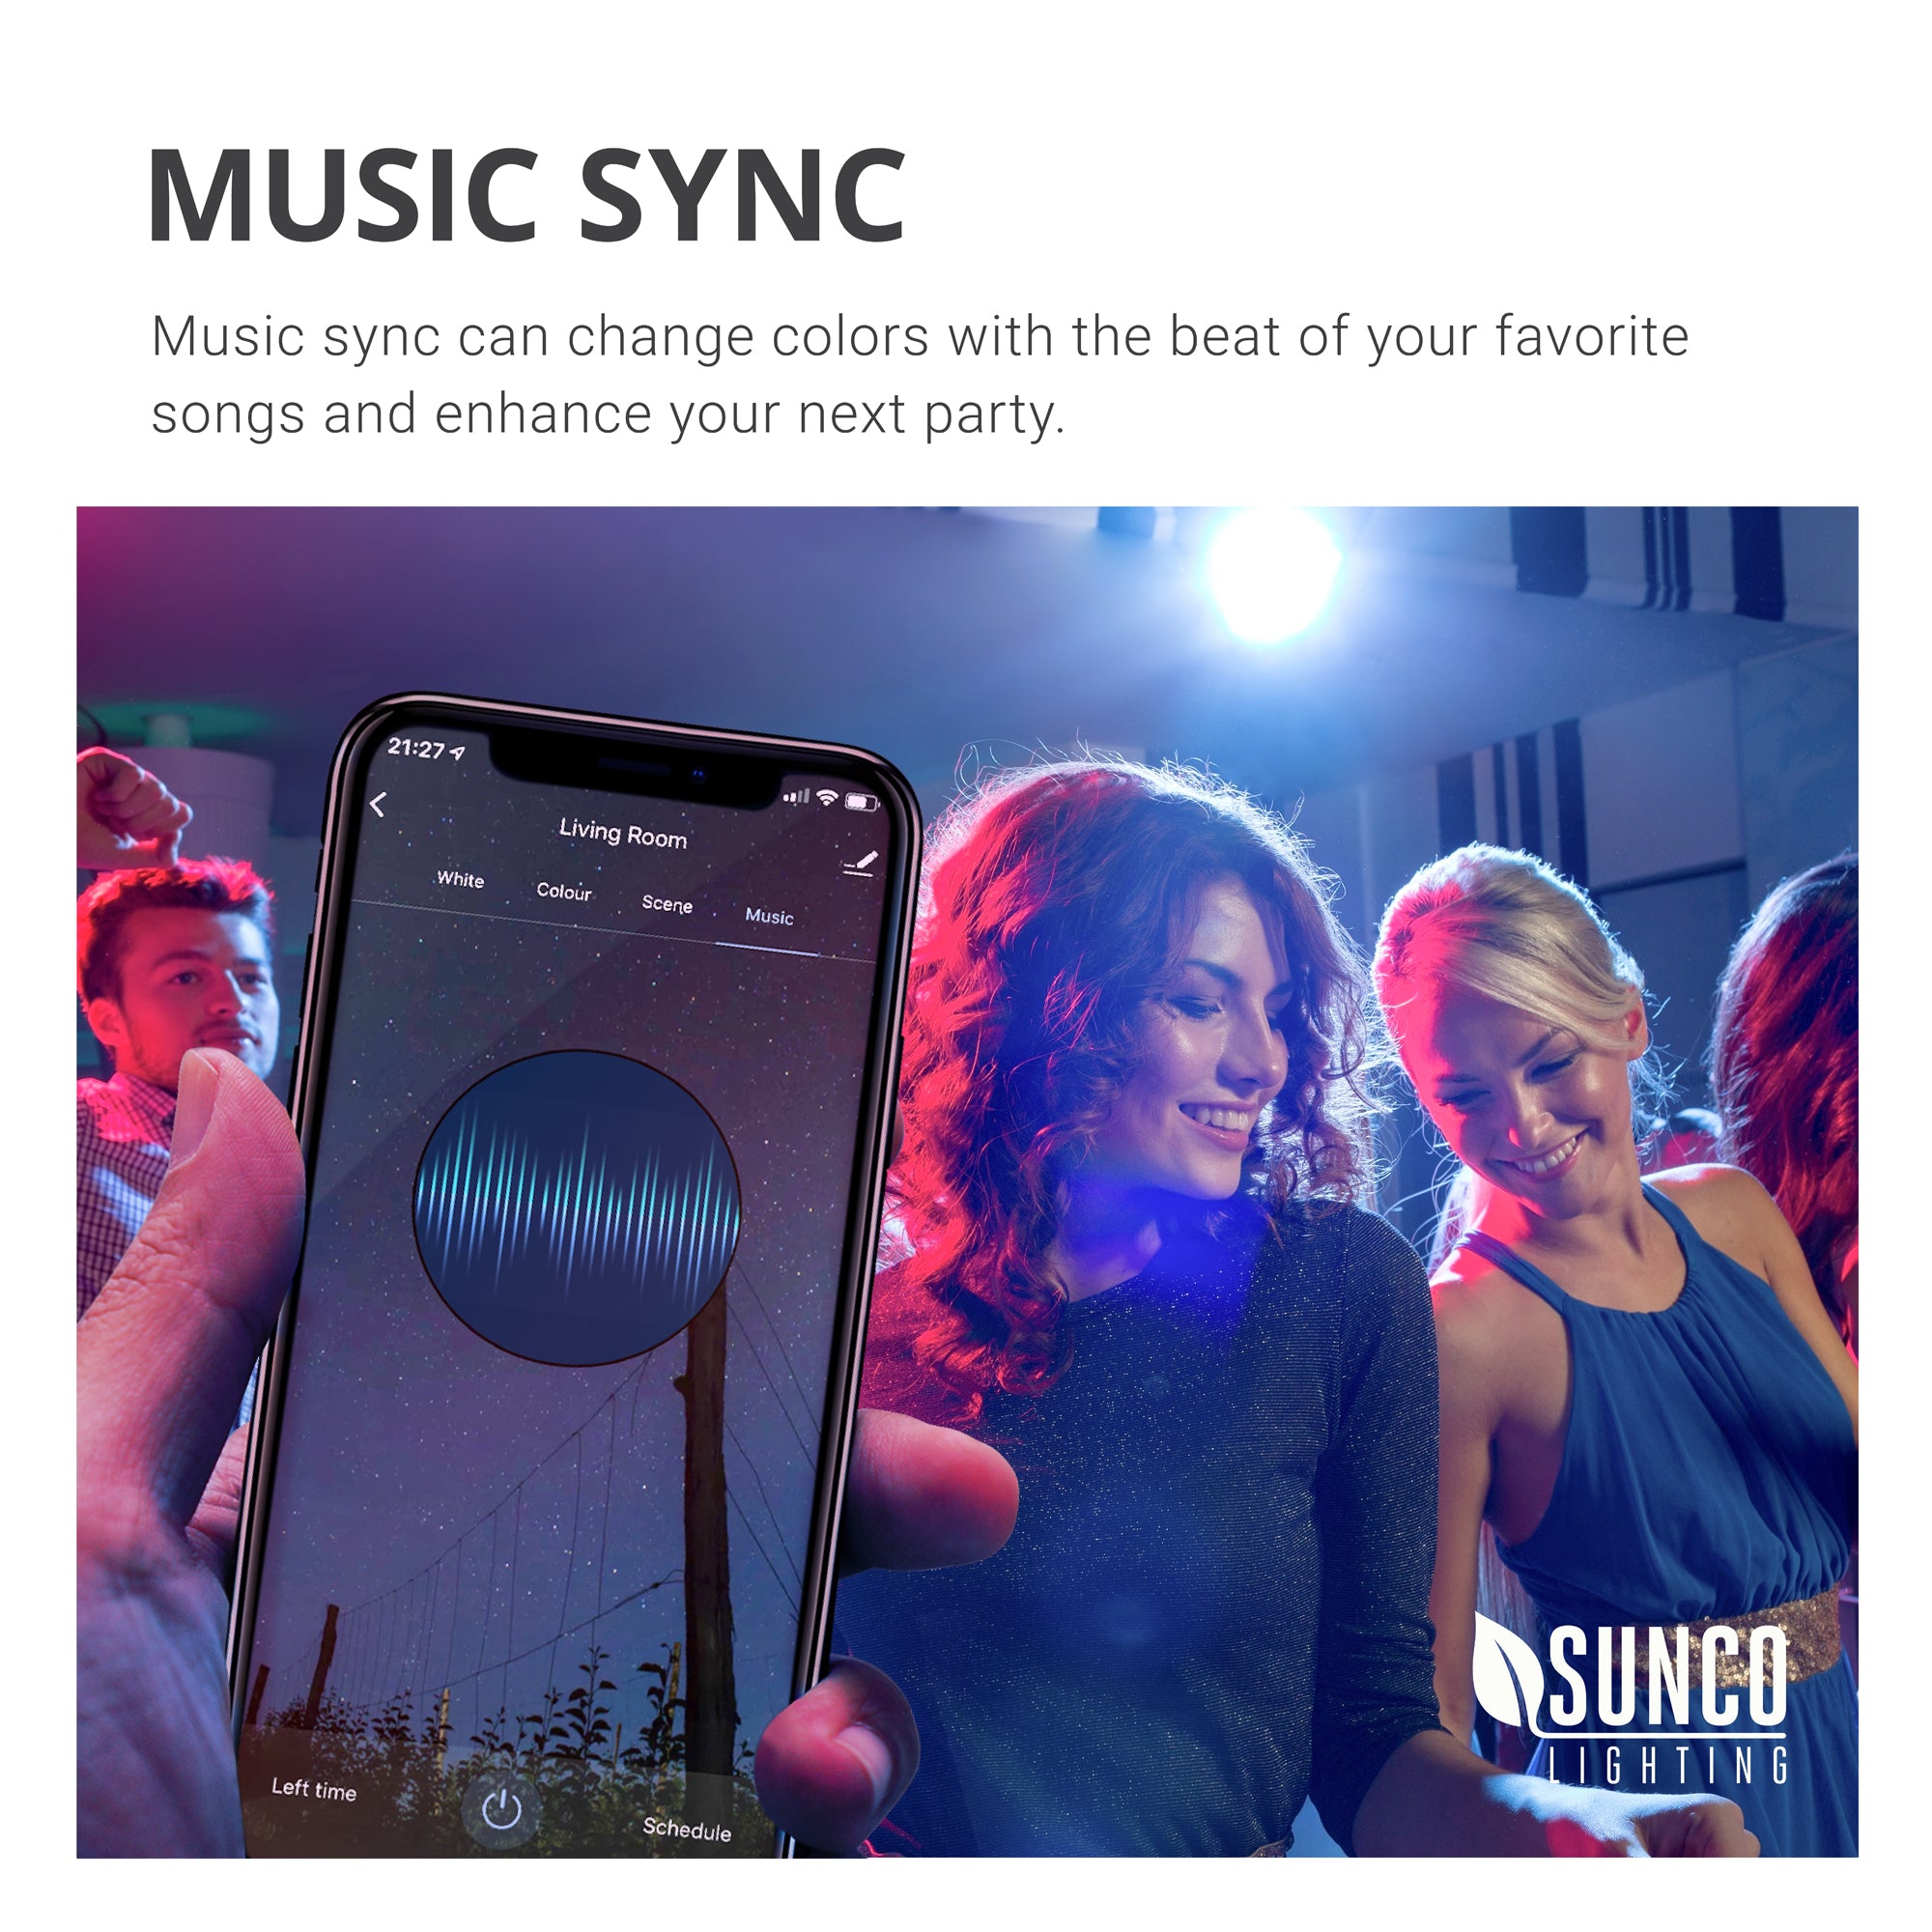 Music Sync can change colors with the beat of your favorite songs and enhance your next party. Image shows friends dancing together under changing light bulb colors with a smart phone showing the Music Sync setting options on a smart phone. You can use a compatible tablet, too. Just keep the smart device, the smart bulb, and your music in the same room and your lights can dance to the beat with you.